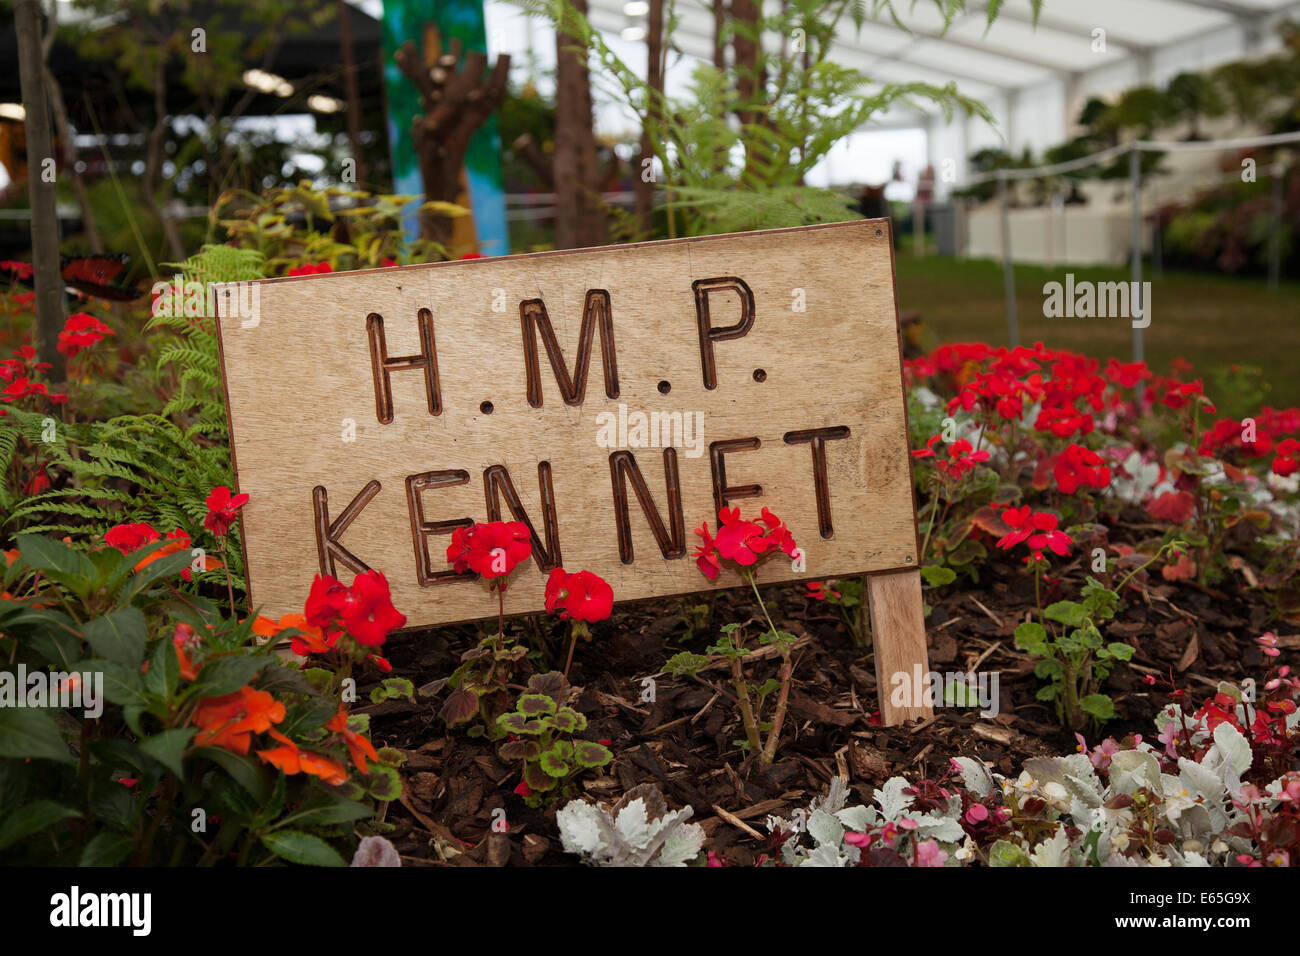 Southport, Merseyside, UK. 15th August, 2014.  H.M.P. KENNET Prison garden exhibit at  Britain's biggest independent flower show. Credit:  Mar Photographics/Alamy Live News. Stock Photo